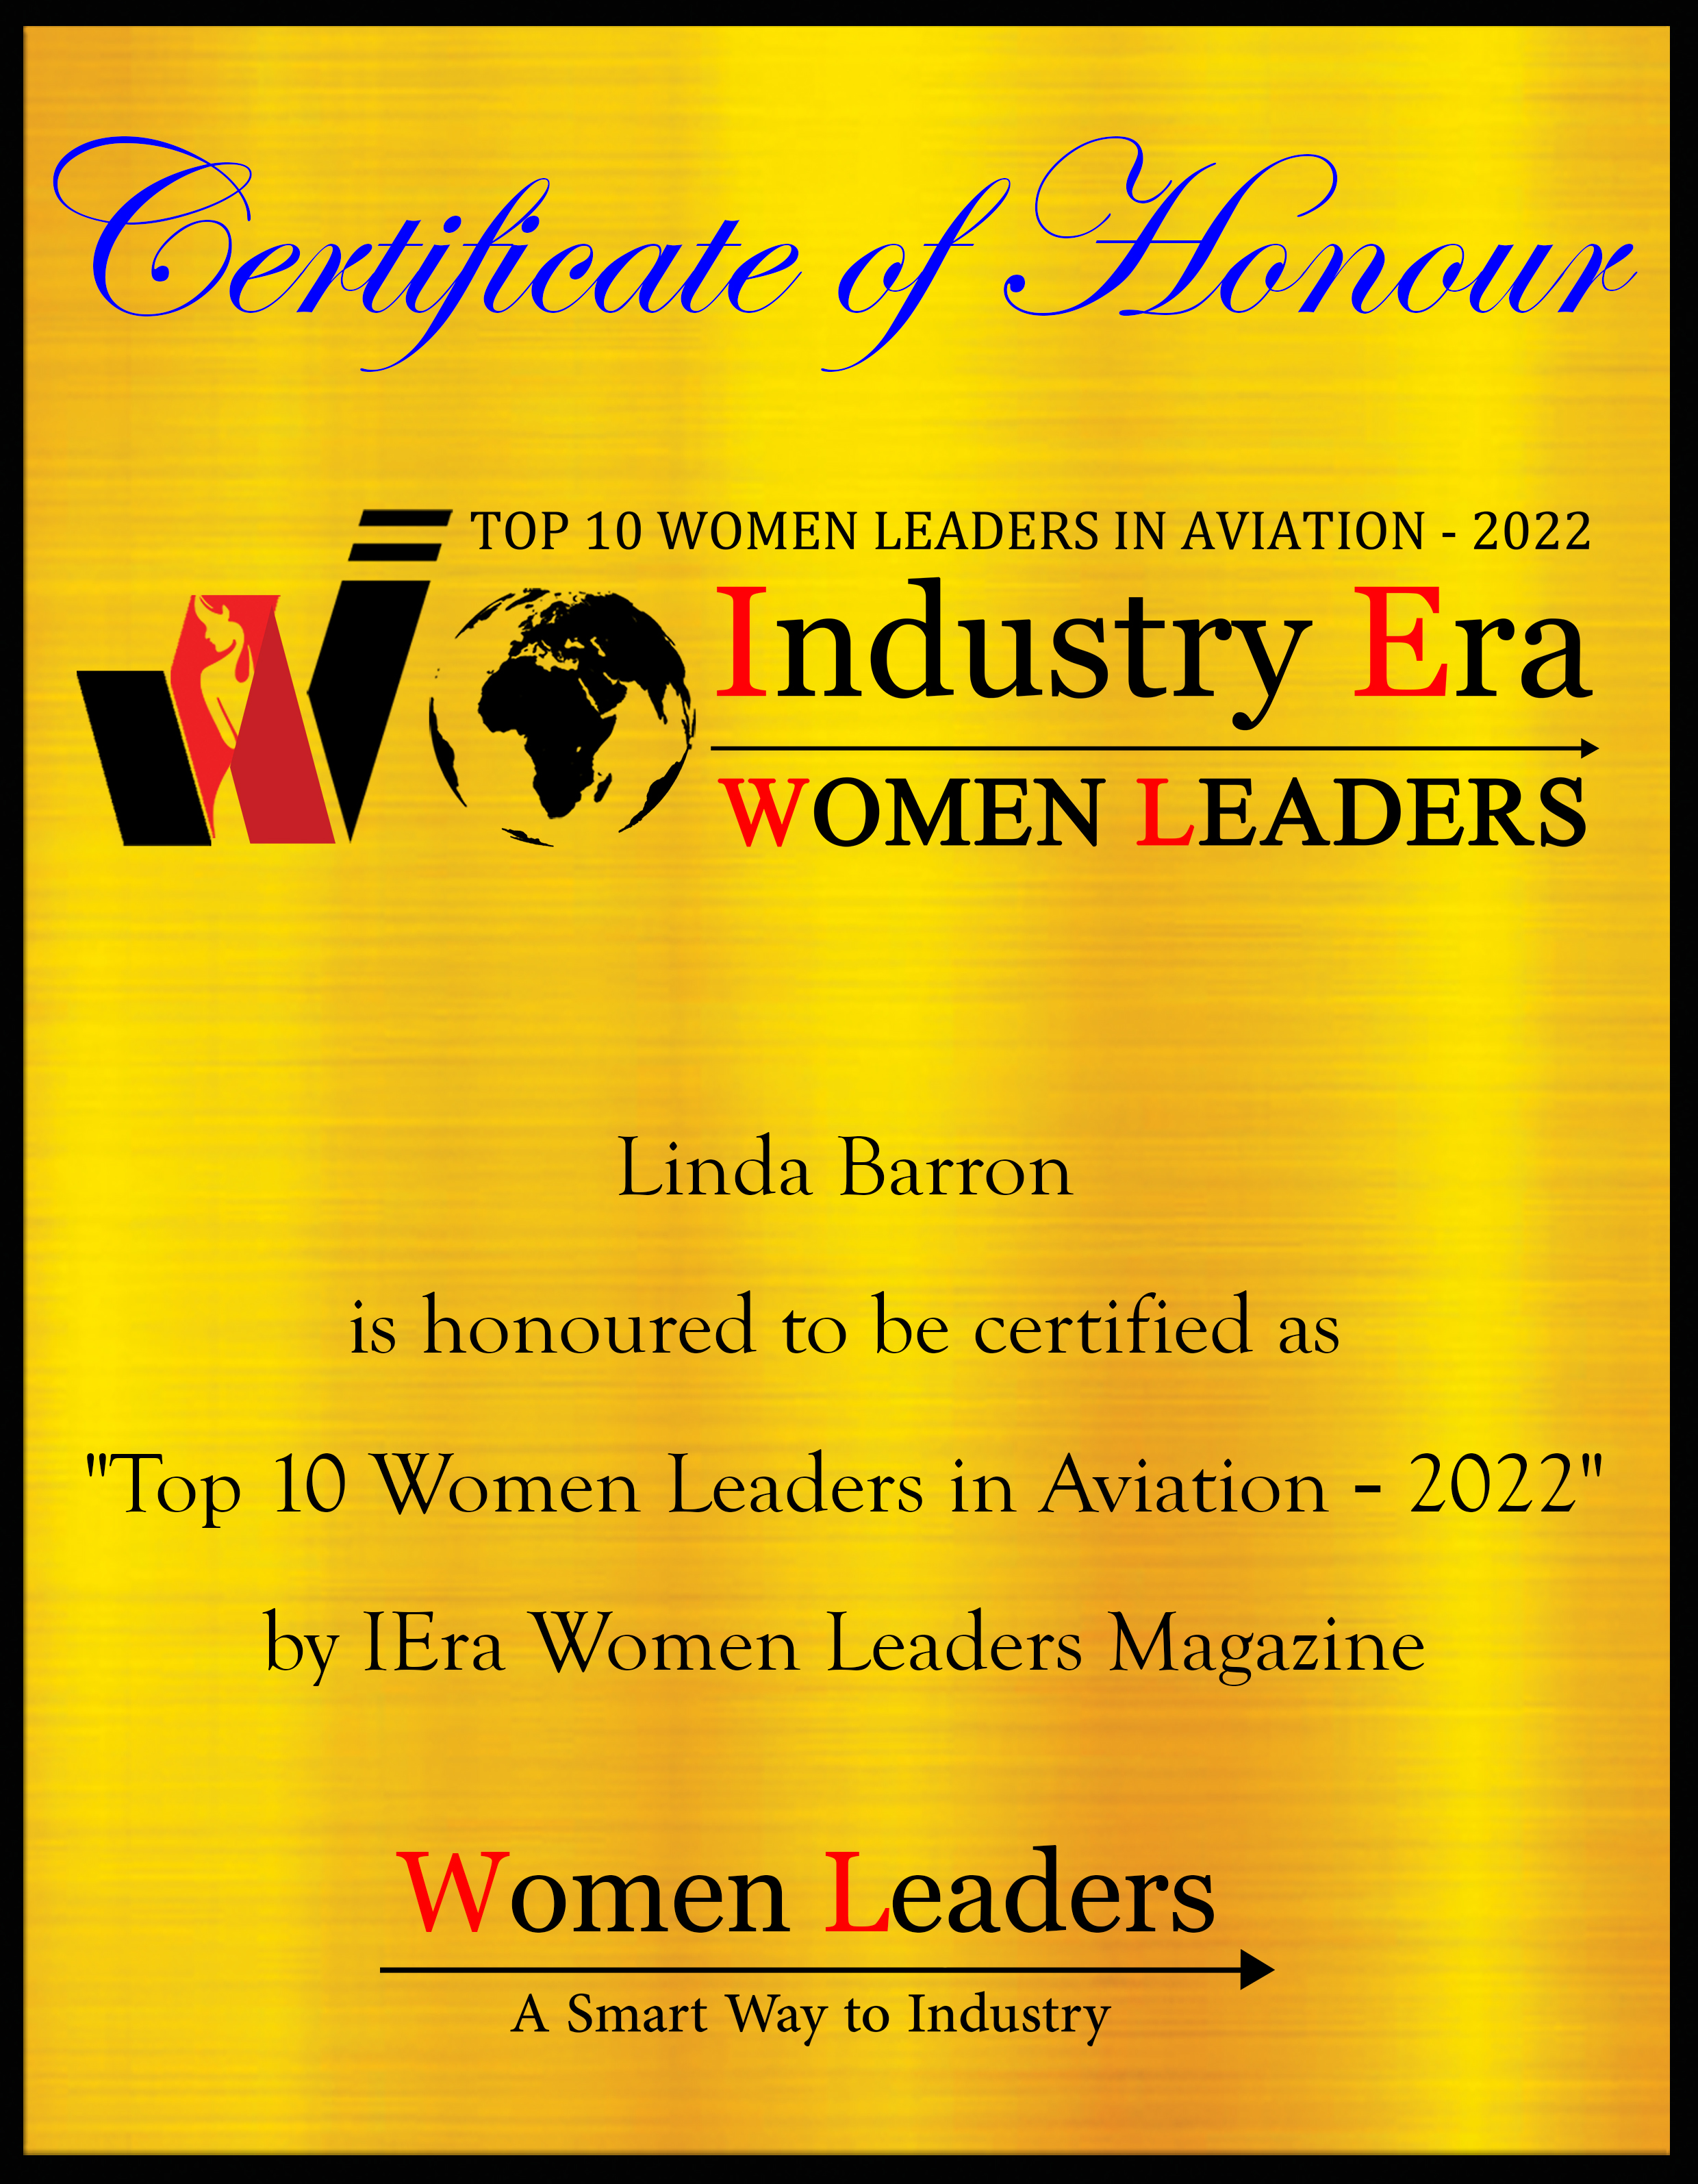 Linda Barron, CEO at The Irish Centre for Business Excellence, Top 10 Women Leaders in Aviation of 2022